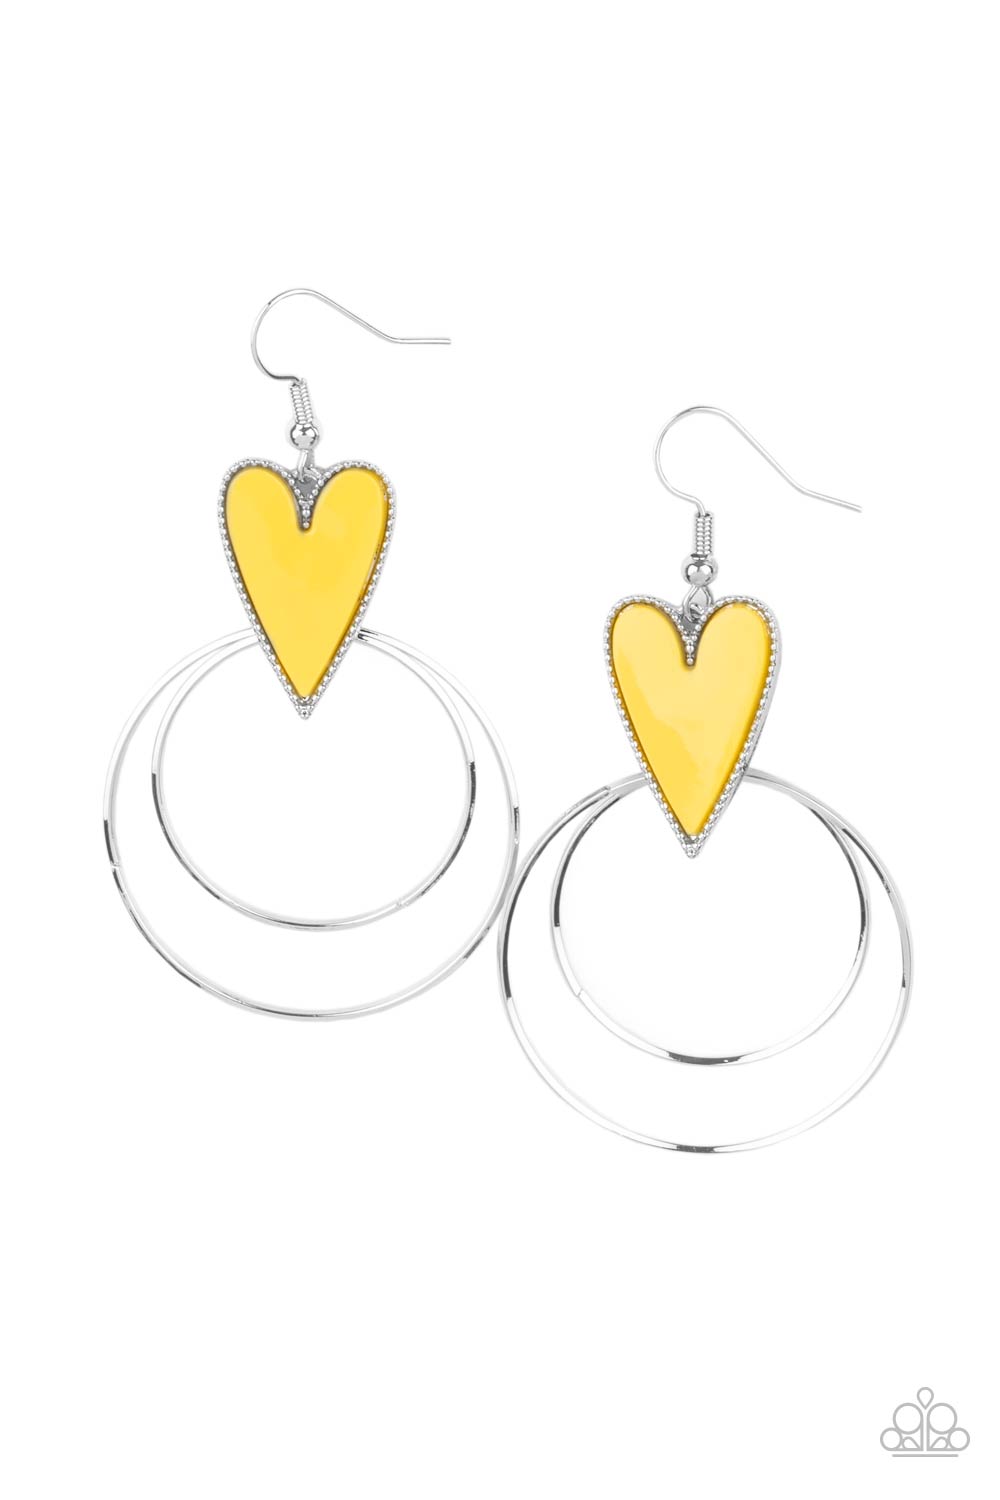 Paparazzi Happily Ever Hearts - Yellow Earrings - A Finishing Touch Jewelry